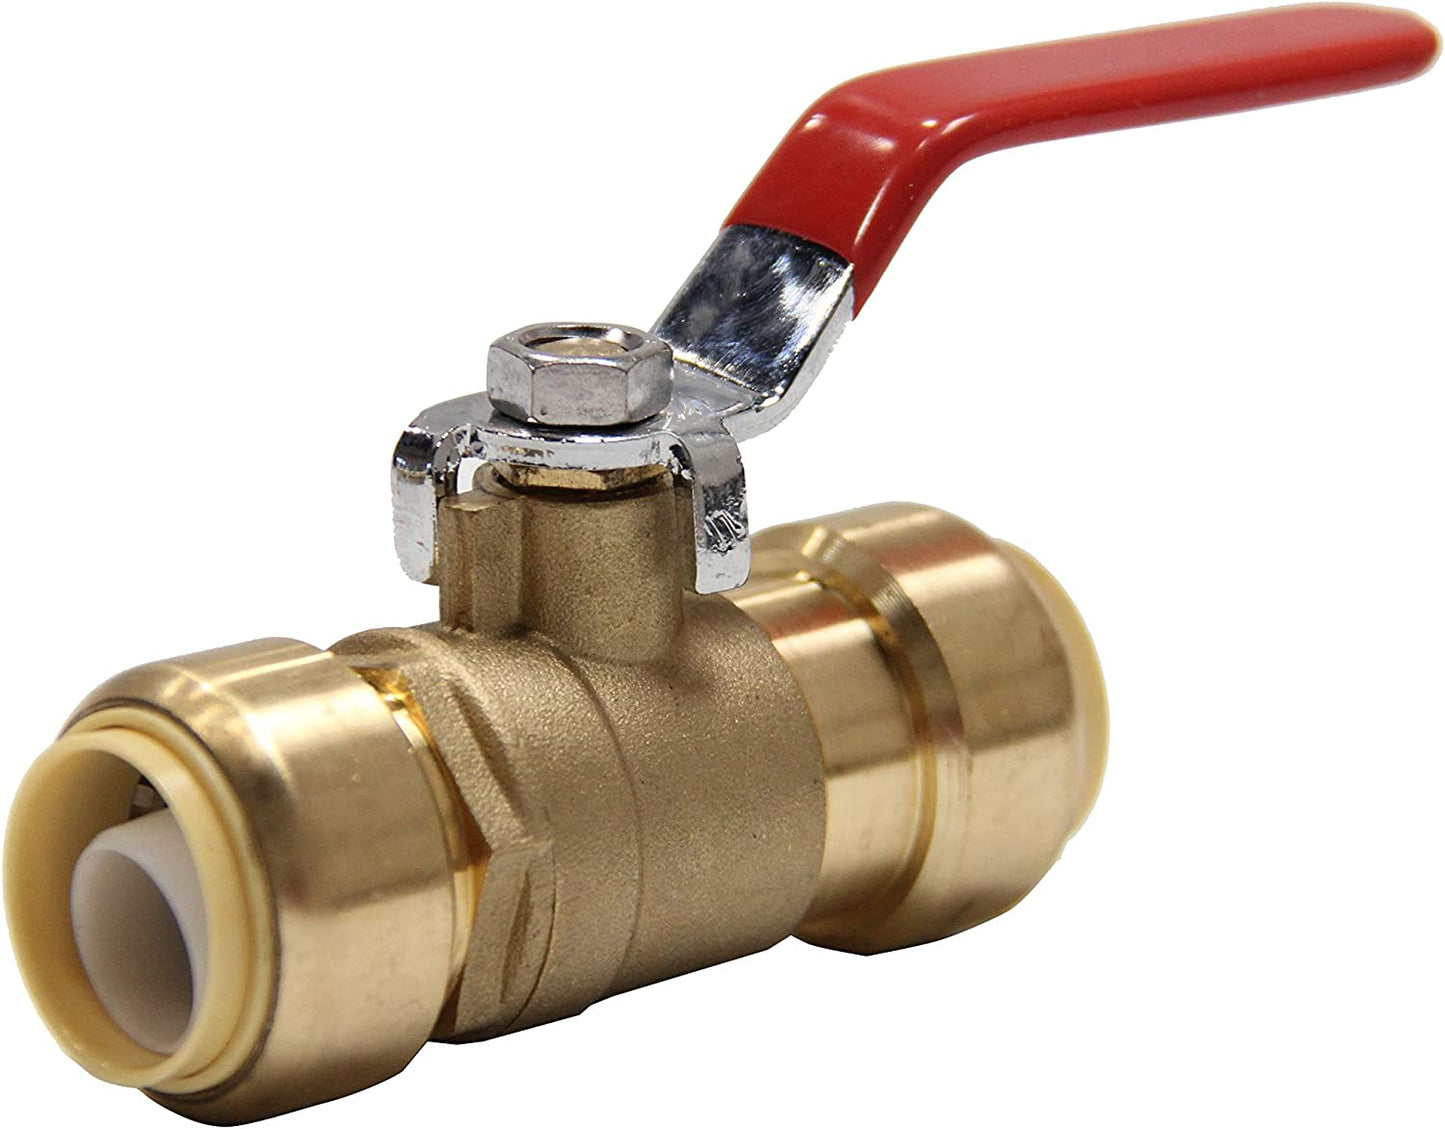 3/4 Inch Ball Valve for Push-Fit Valve Full Port Ball Valve with Disconnect Clip, UPC Certified 1 Piece